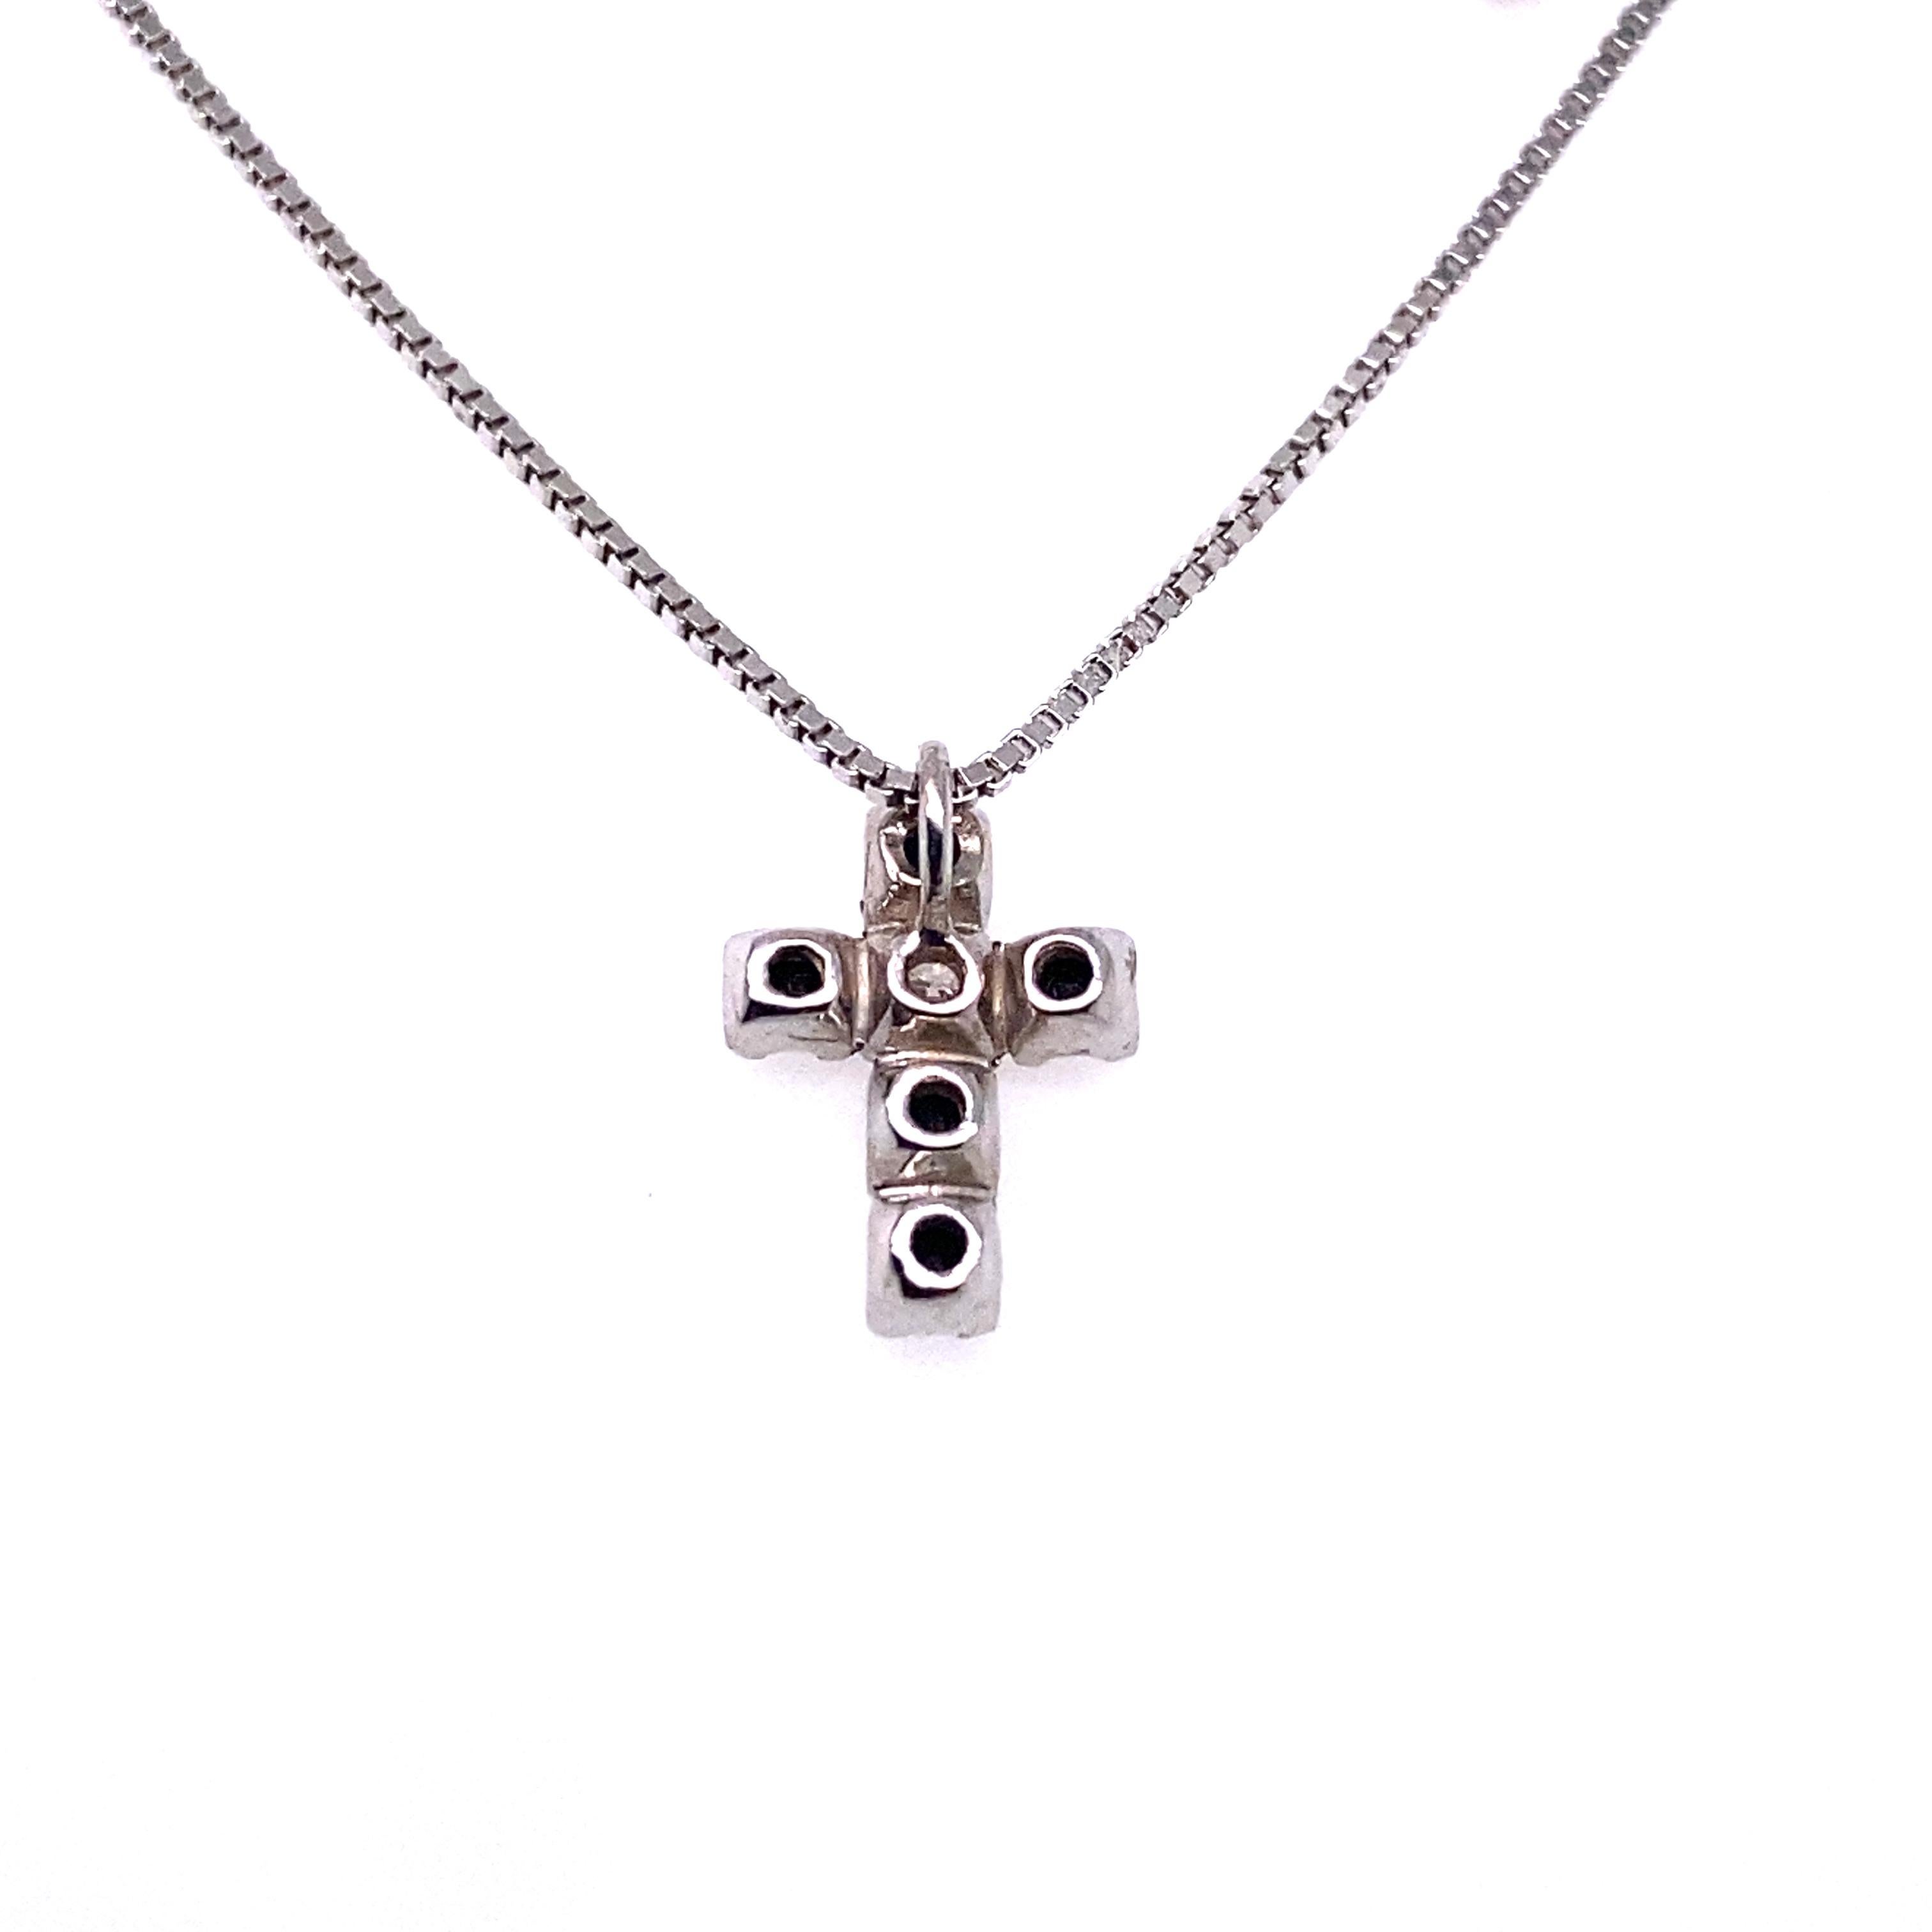 A beautiful contemporary cross with a white diamond (G VS) and black diamonds set in 18-karat white gold. The chain is a delicate 18-karat white gold. The pendant measures .7-centimetres across, and 1-centimetre long. 

Are you looking for a set?